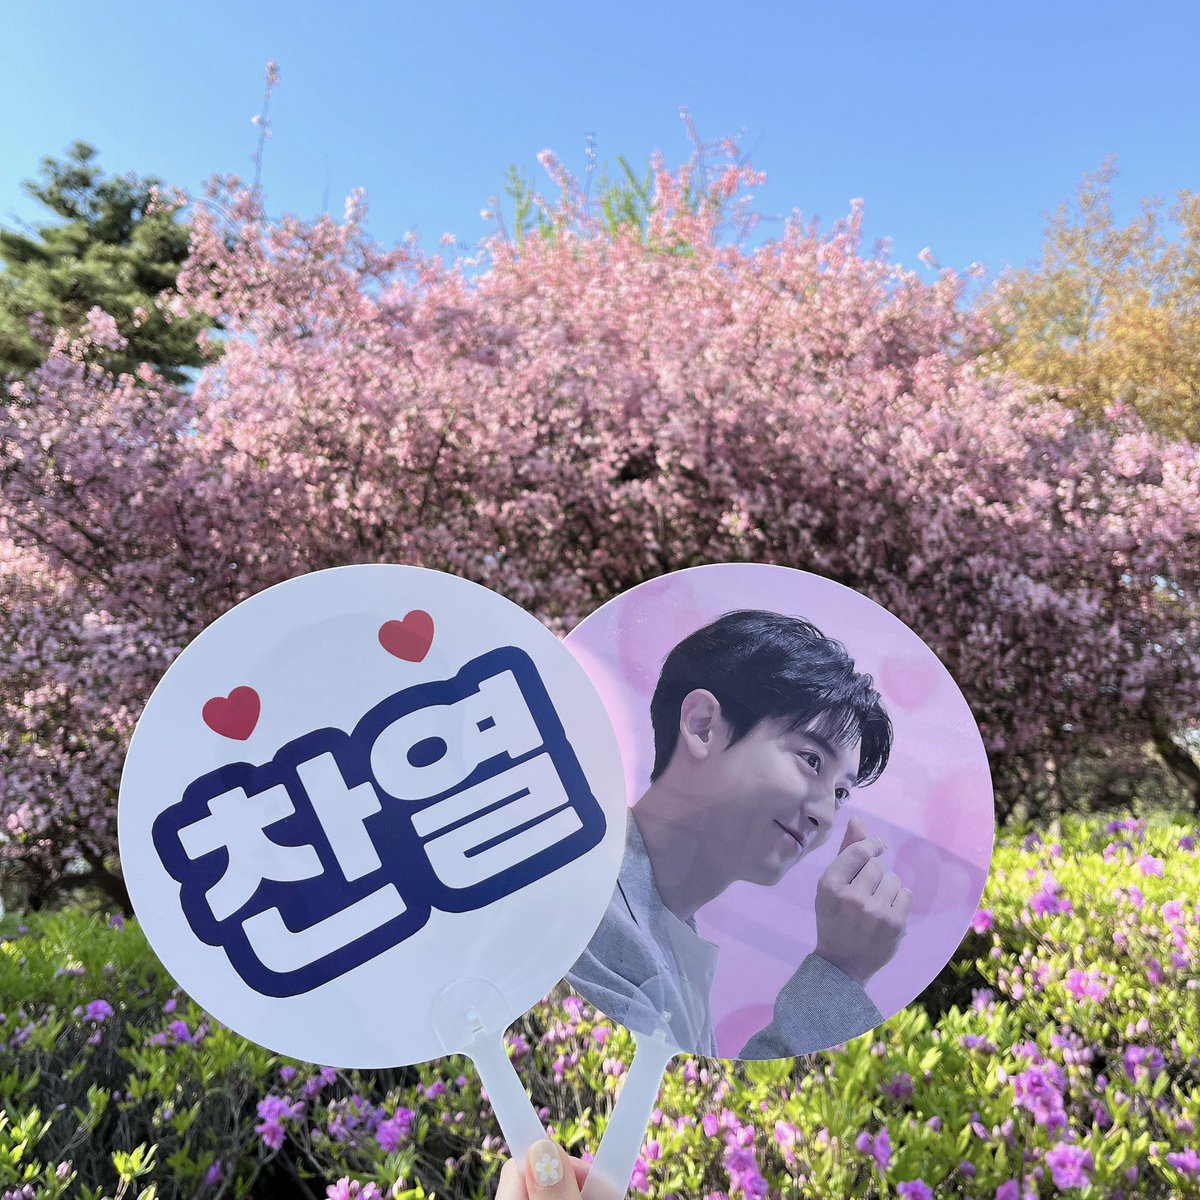 We will distribute a hand fan for CHANYEOL in EXO-SC Fancon MANILA🇵🇭

🔥Please show PHYSICAL CY Official photo cards, goods or CY items🍒 

The time and location will be announced tomorrow. Stay tuned our tweet! 

#EXOSC_BackToBack_in_mnl
#EXOSCinMNL